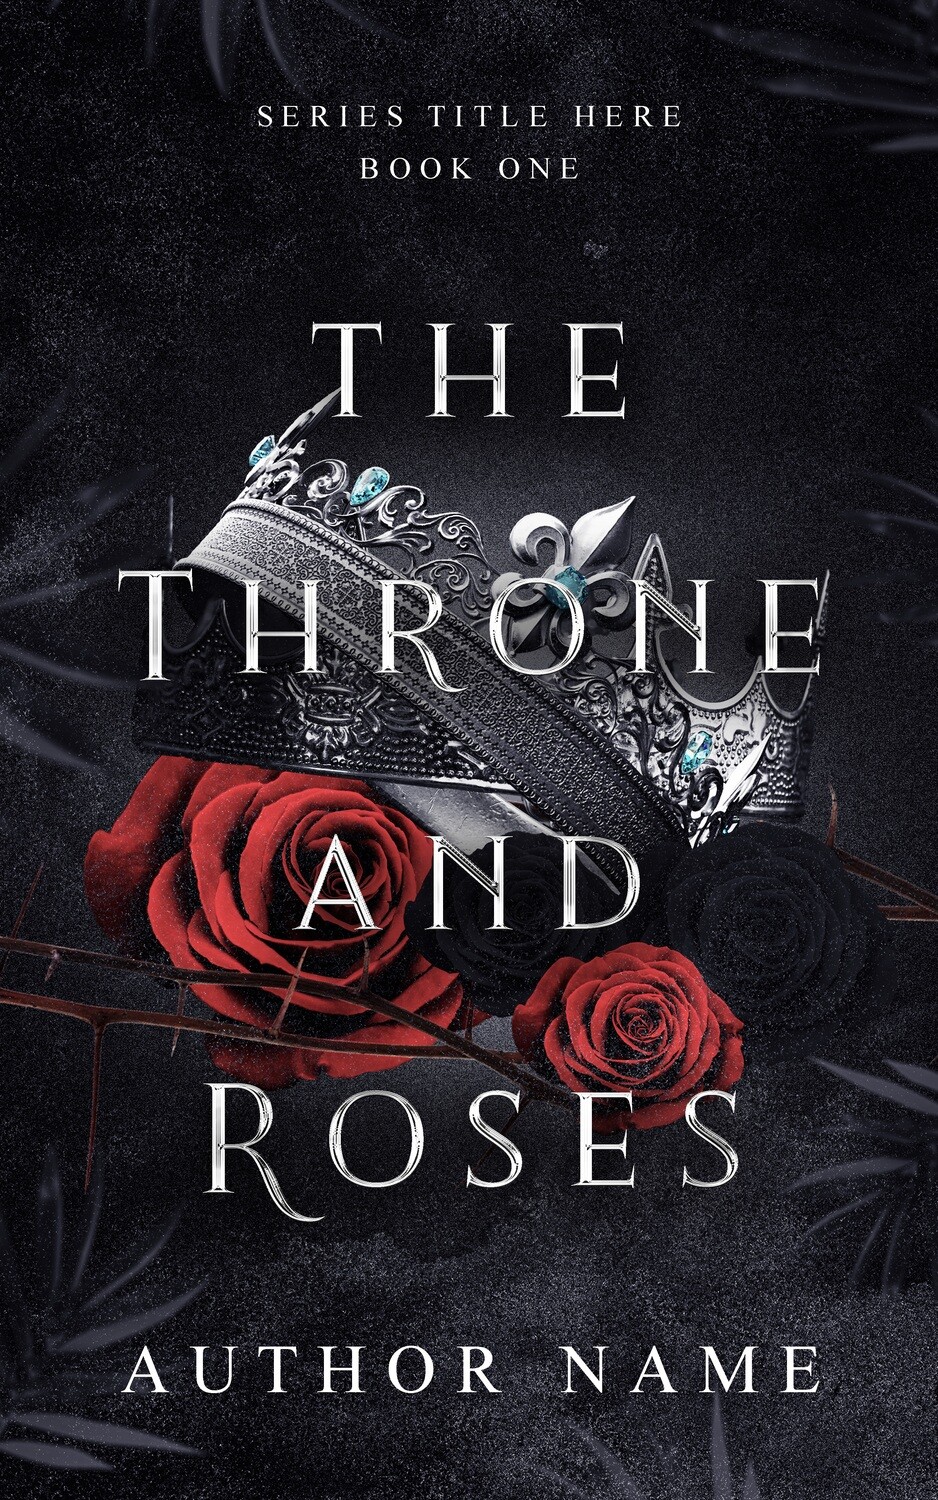 THE THRONE AND ROSES